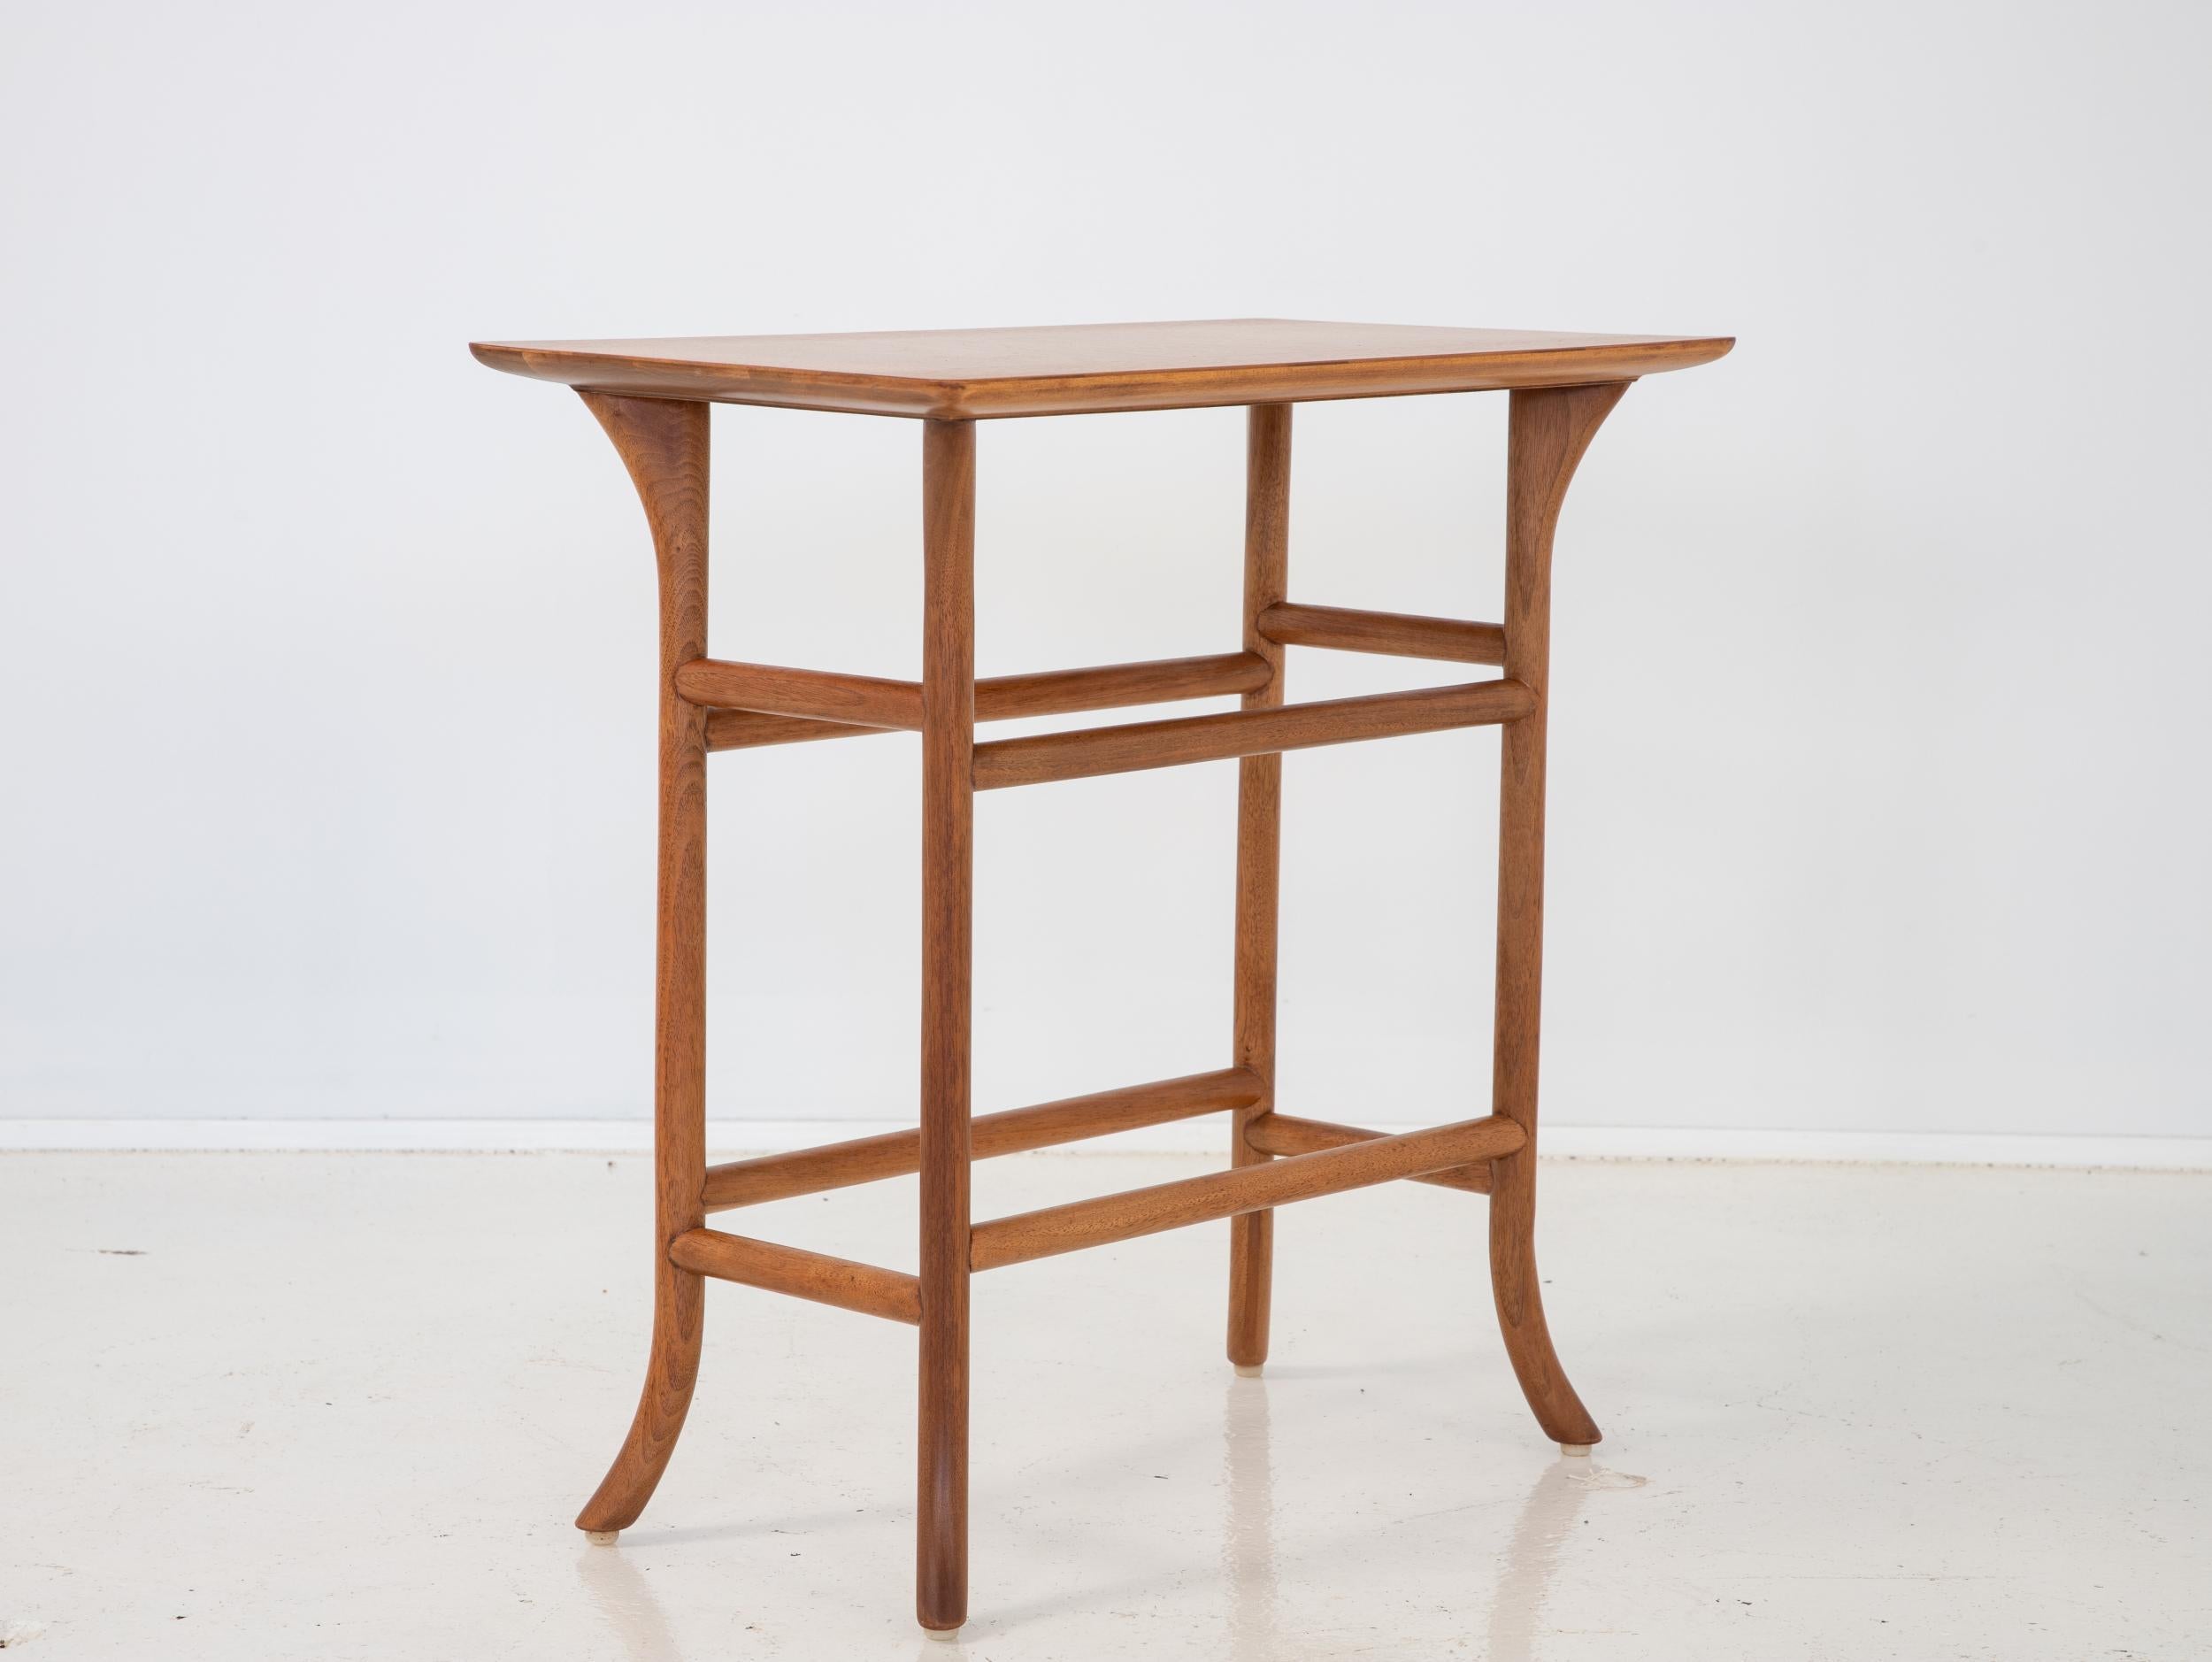 A refined drinks or side table, designed by T.H. Robsjohn-Gibbings for Widdicomb. A mid-century modern design with neoclassical influences, based in the designer's deep knowledge of classical furniture forms from Ancient Greece. Finely carved,